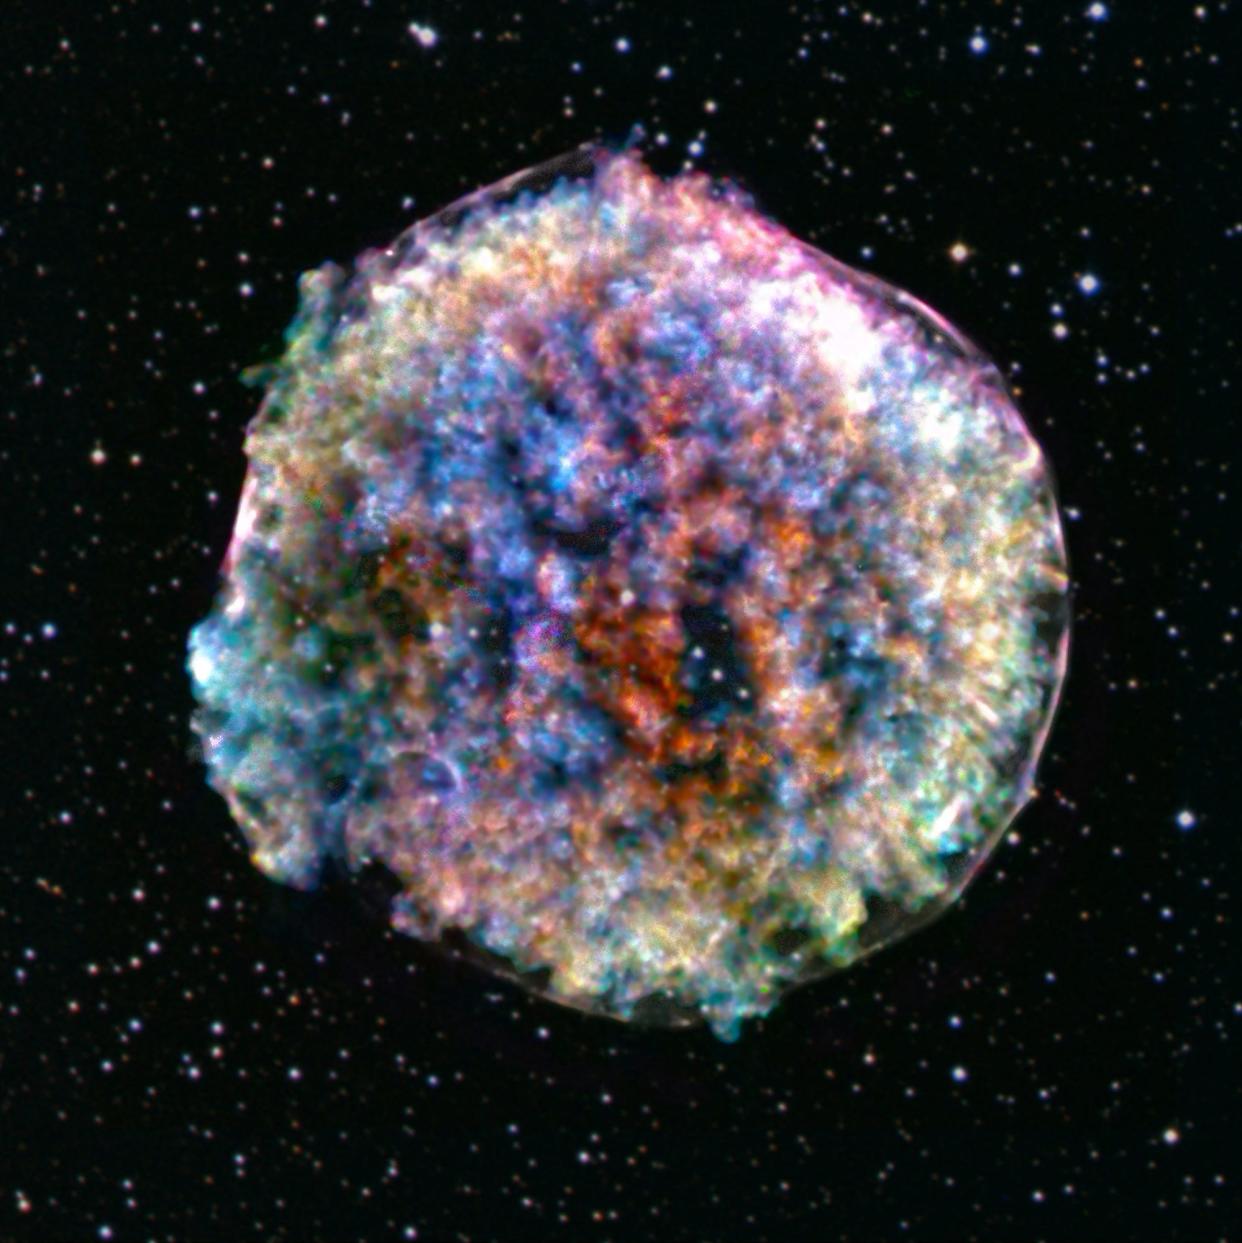 supernova remnant in space clumpy colorful textured bubble with shades of red orange blue yellow green purple white